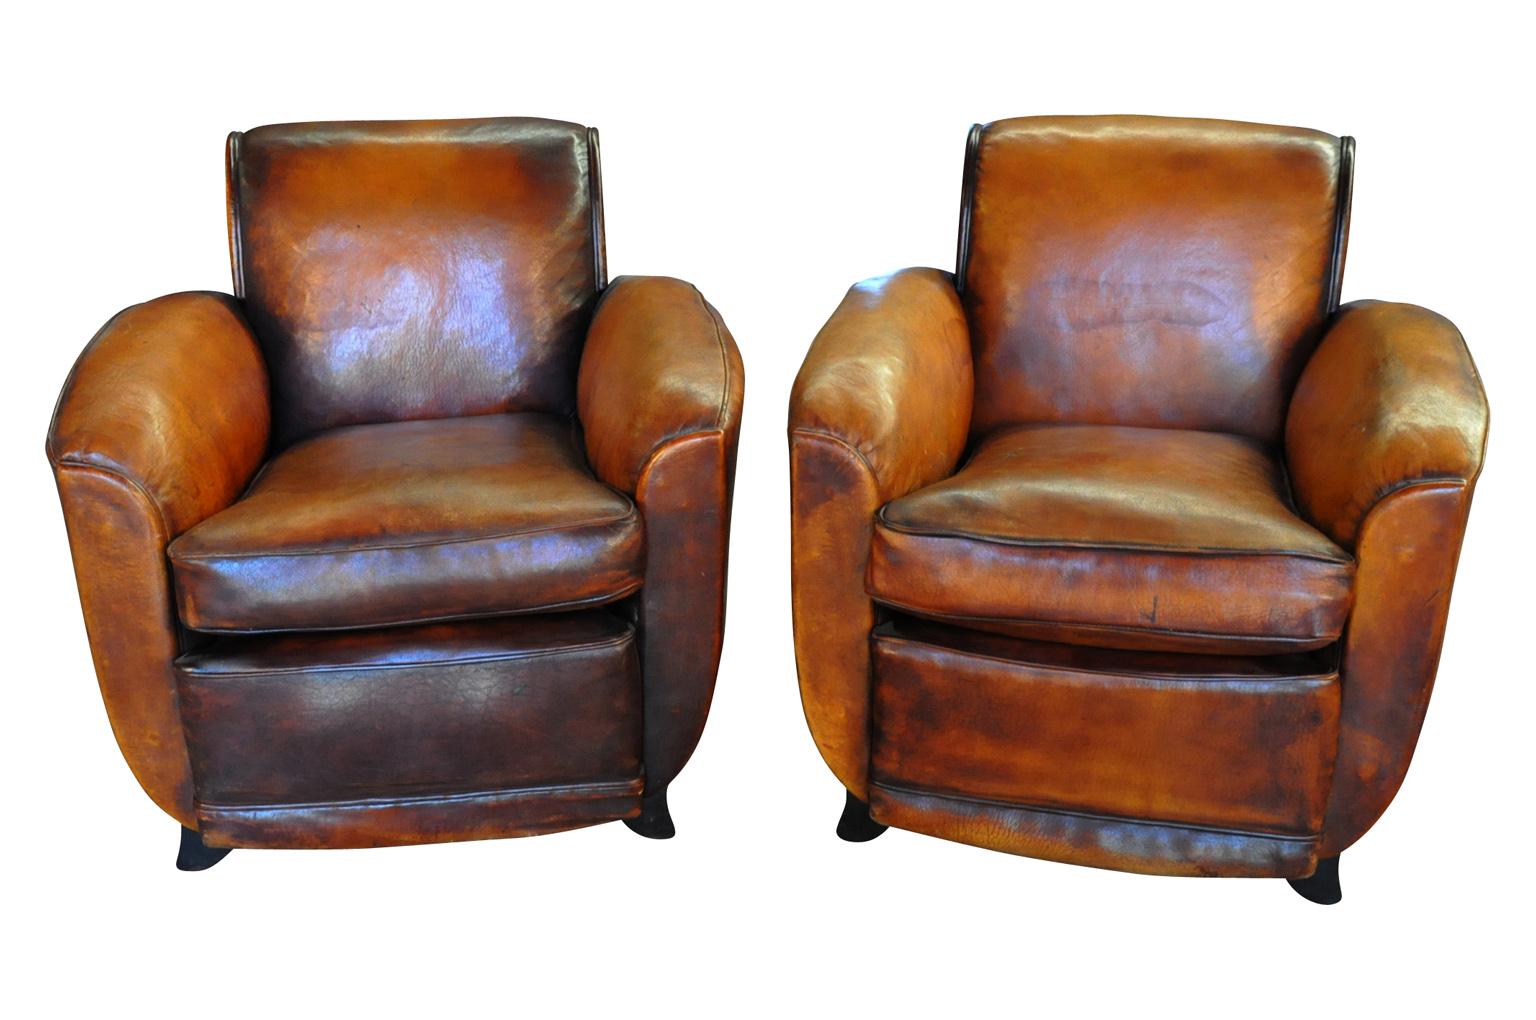 A terrific pair of French Art Deco period club chairs beautifully crafted from leather. Very classic and elegant lines.